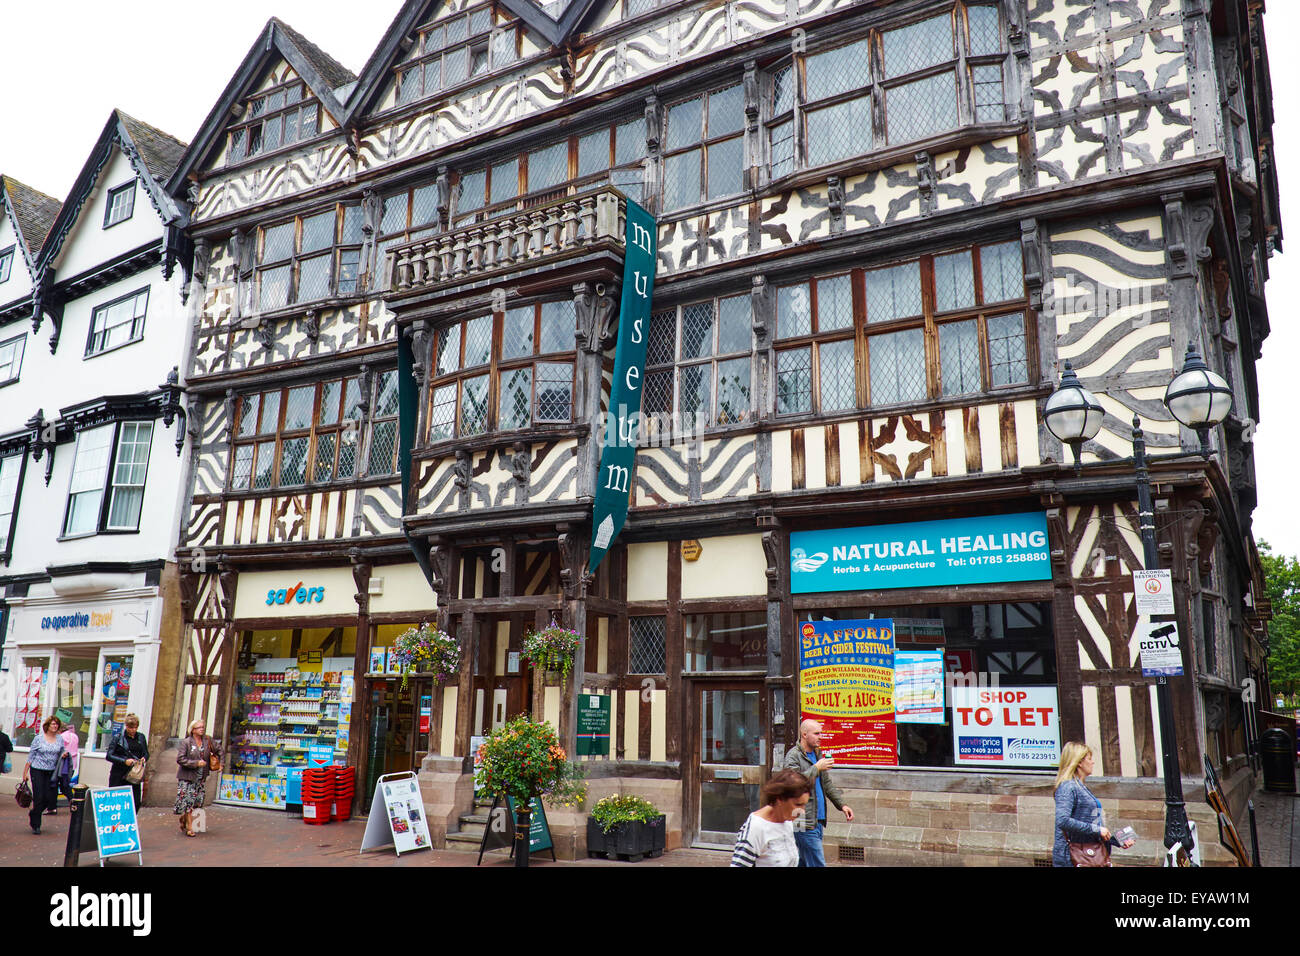 Elizabethan Ancient High House In The Town Centre Is The Largest Timber-Framed Town House In England Stafford Staffordshire UK Stock Photo